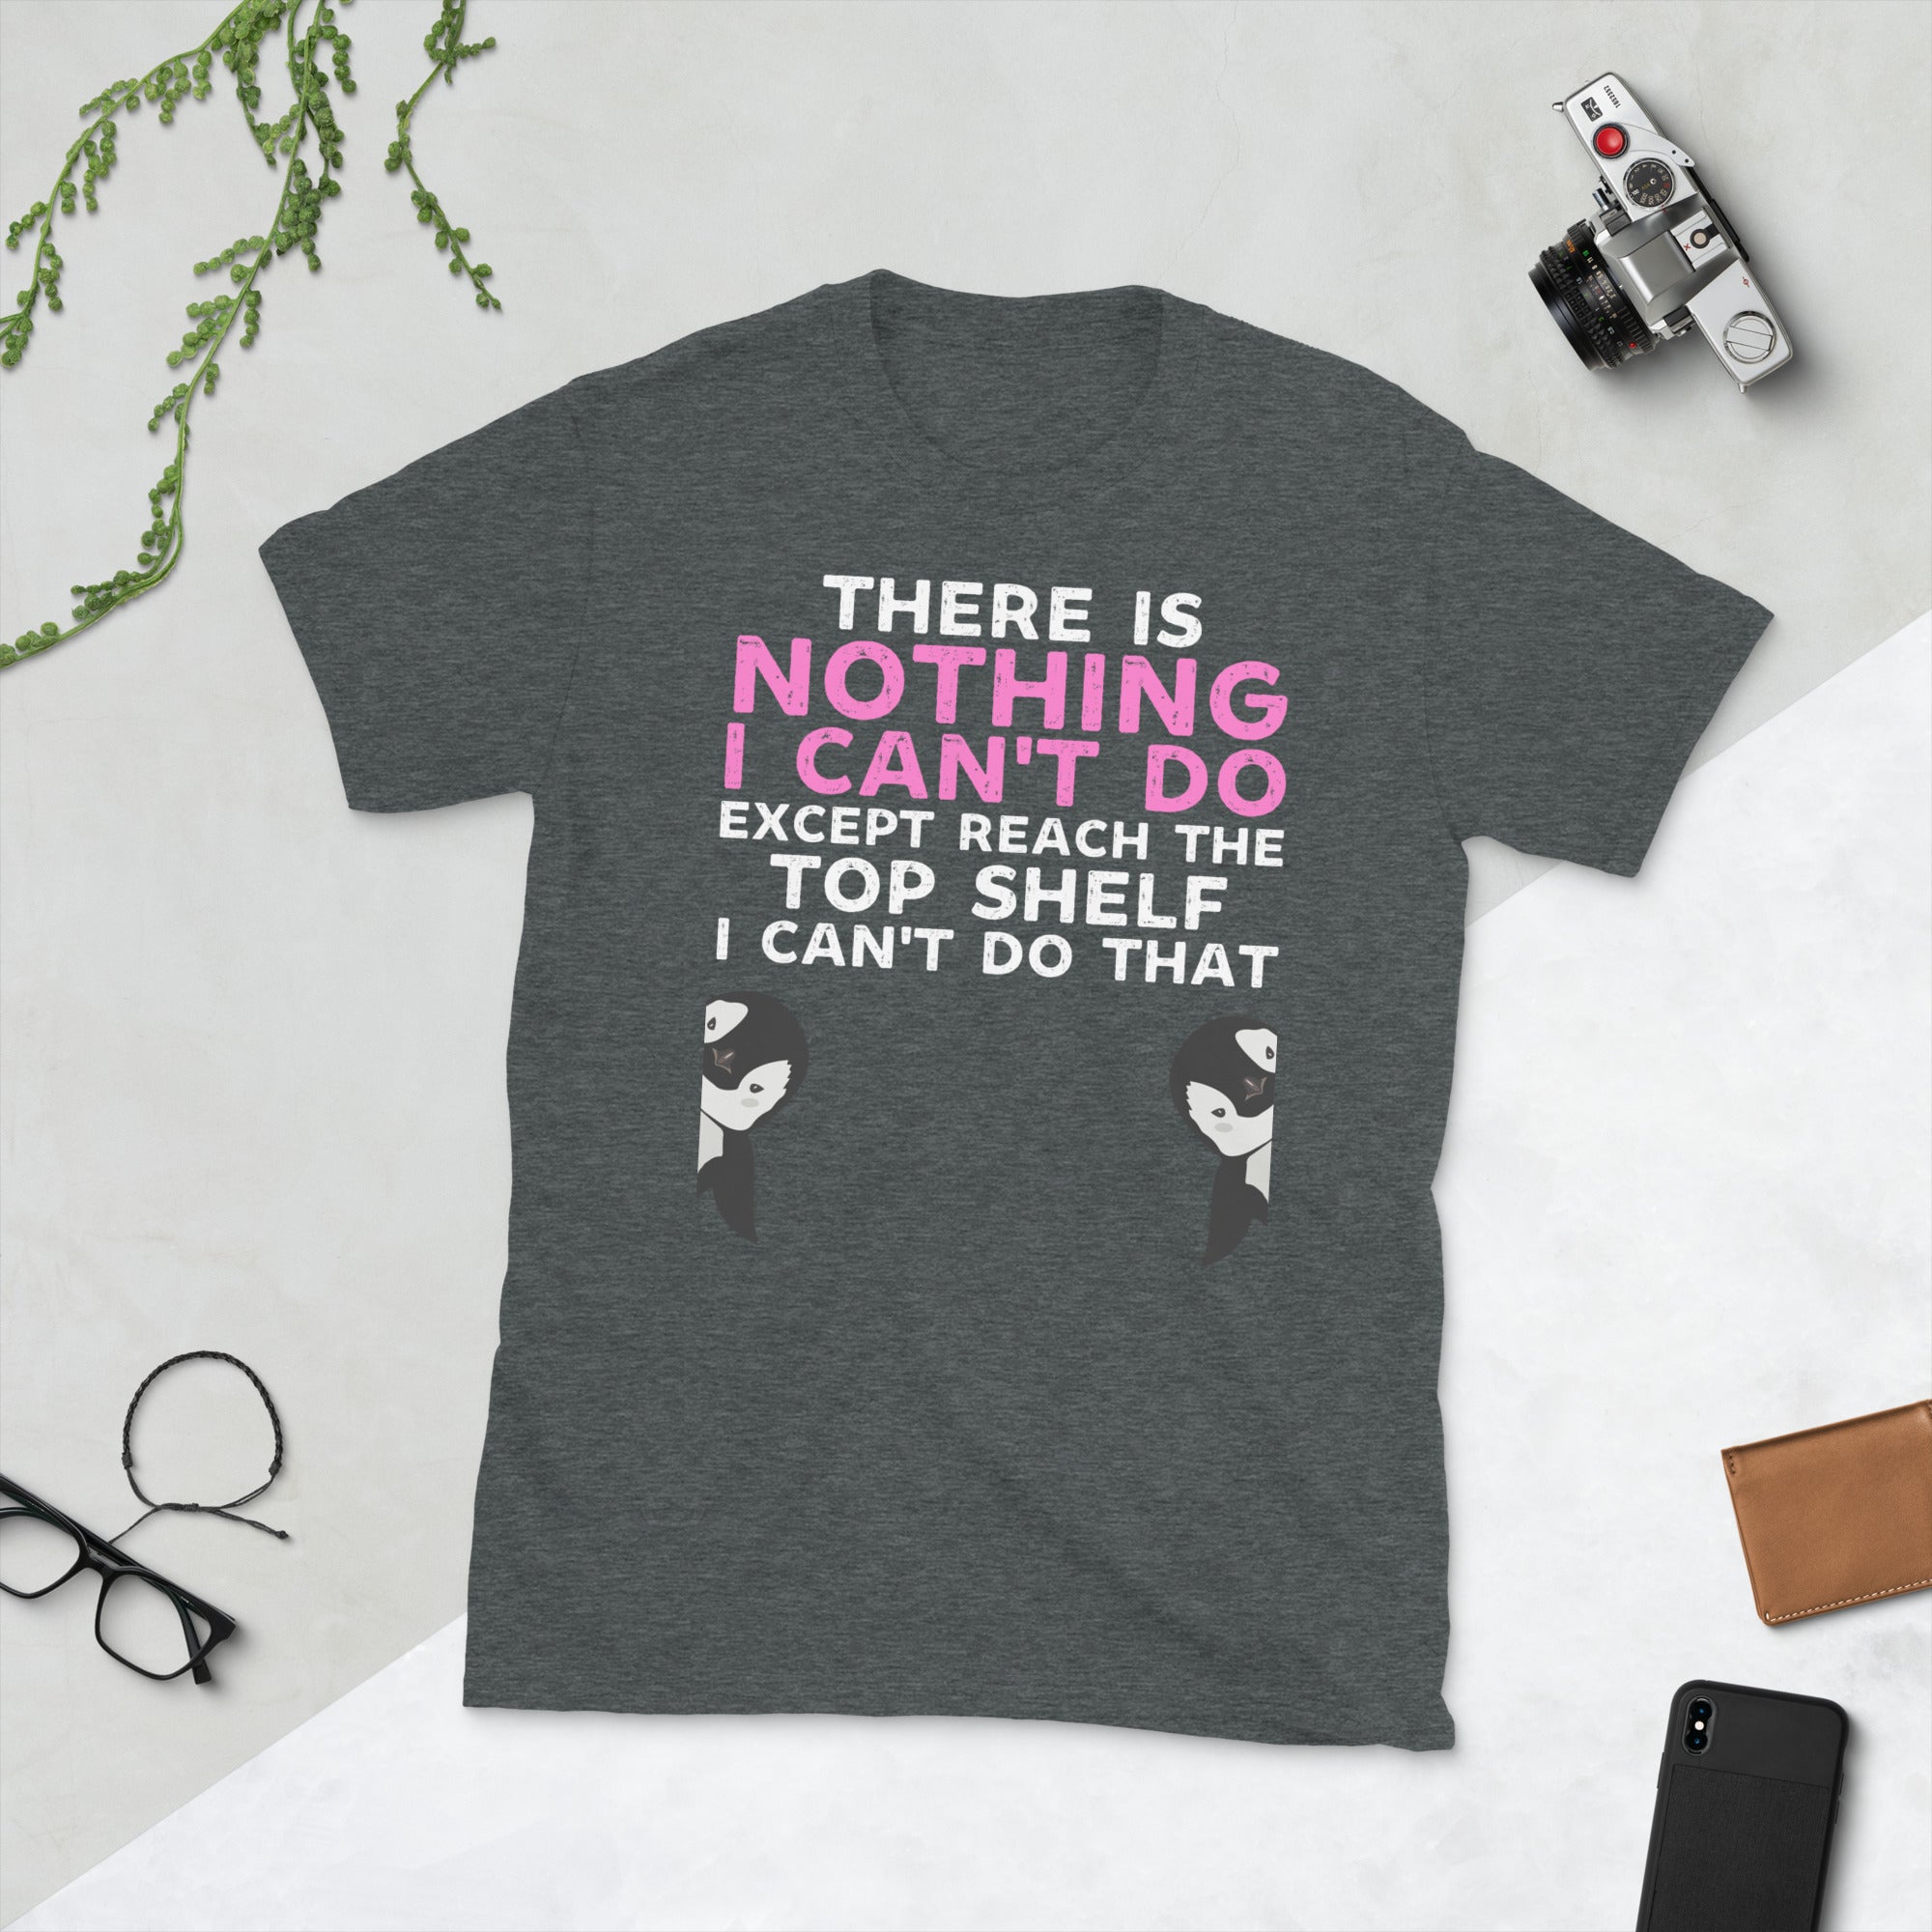 There Is Nothing I Can’t Do Except Reach The Top Shelf I Cant Do That, Funny Short Girls Shirt, Funny Sayings Shirts, Short Girls Problem